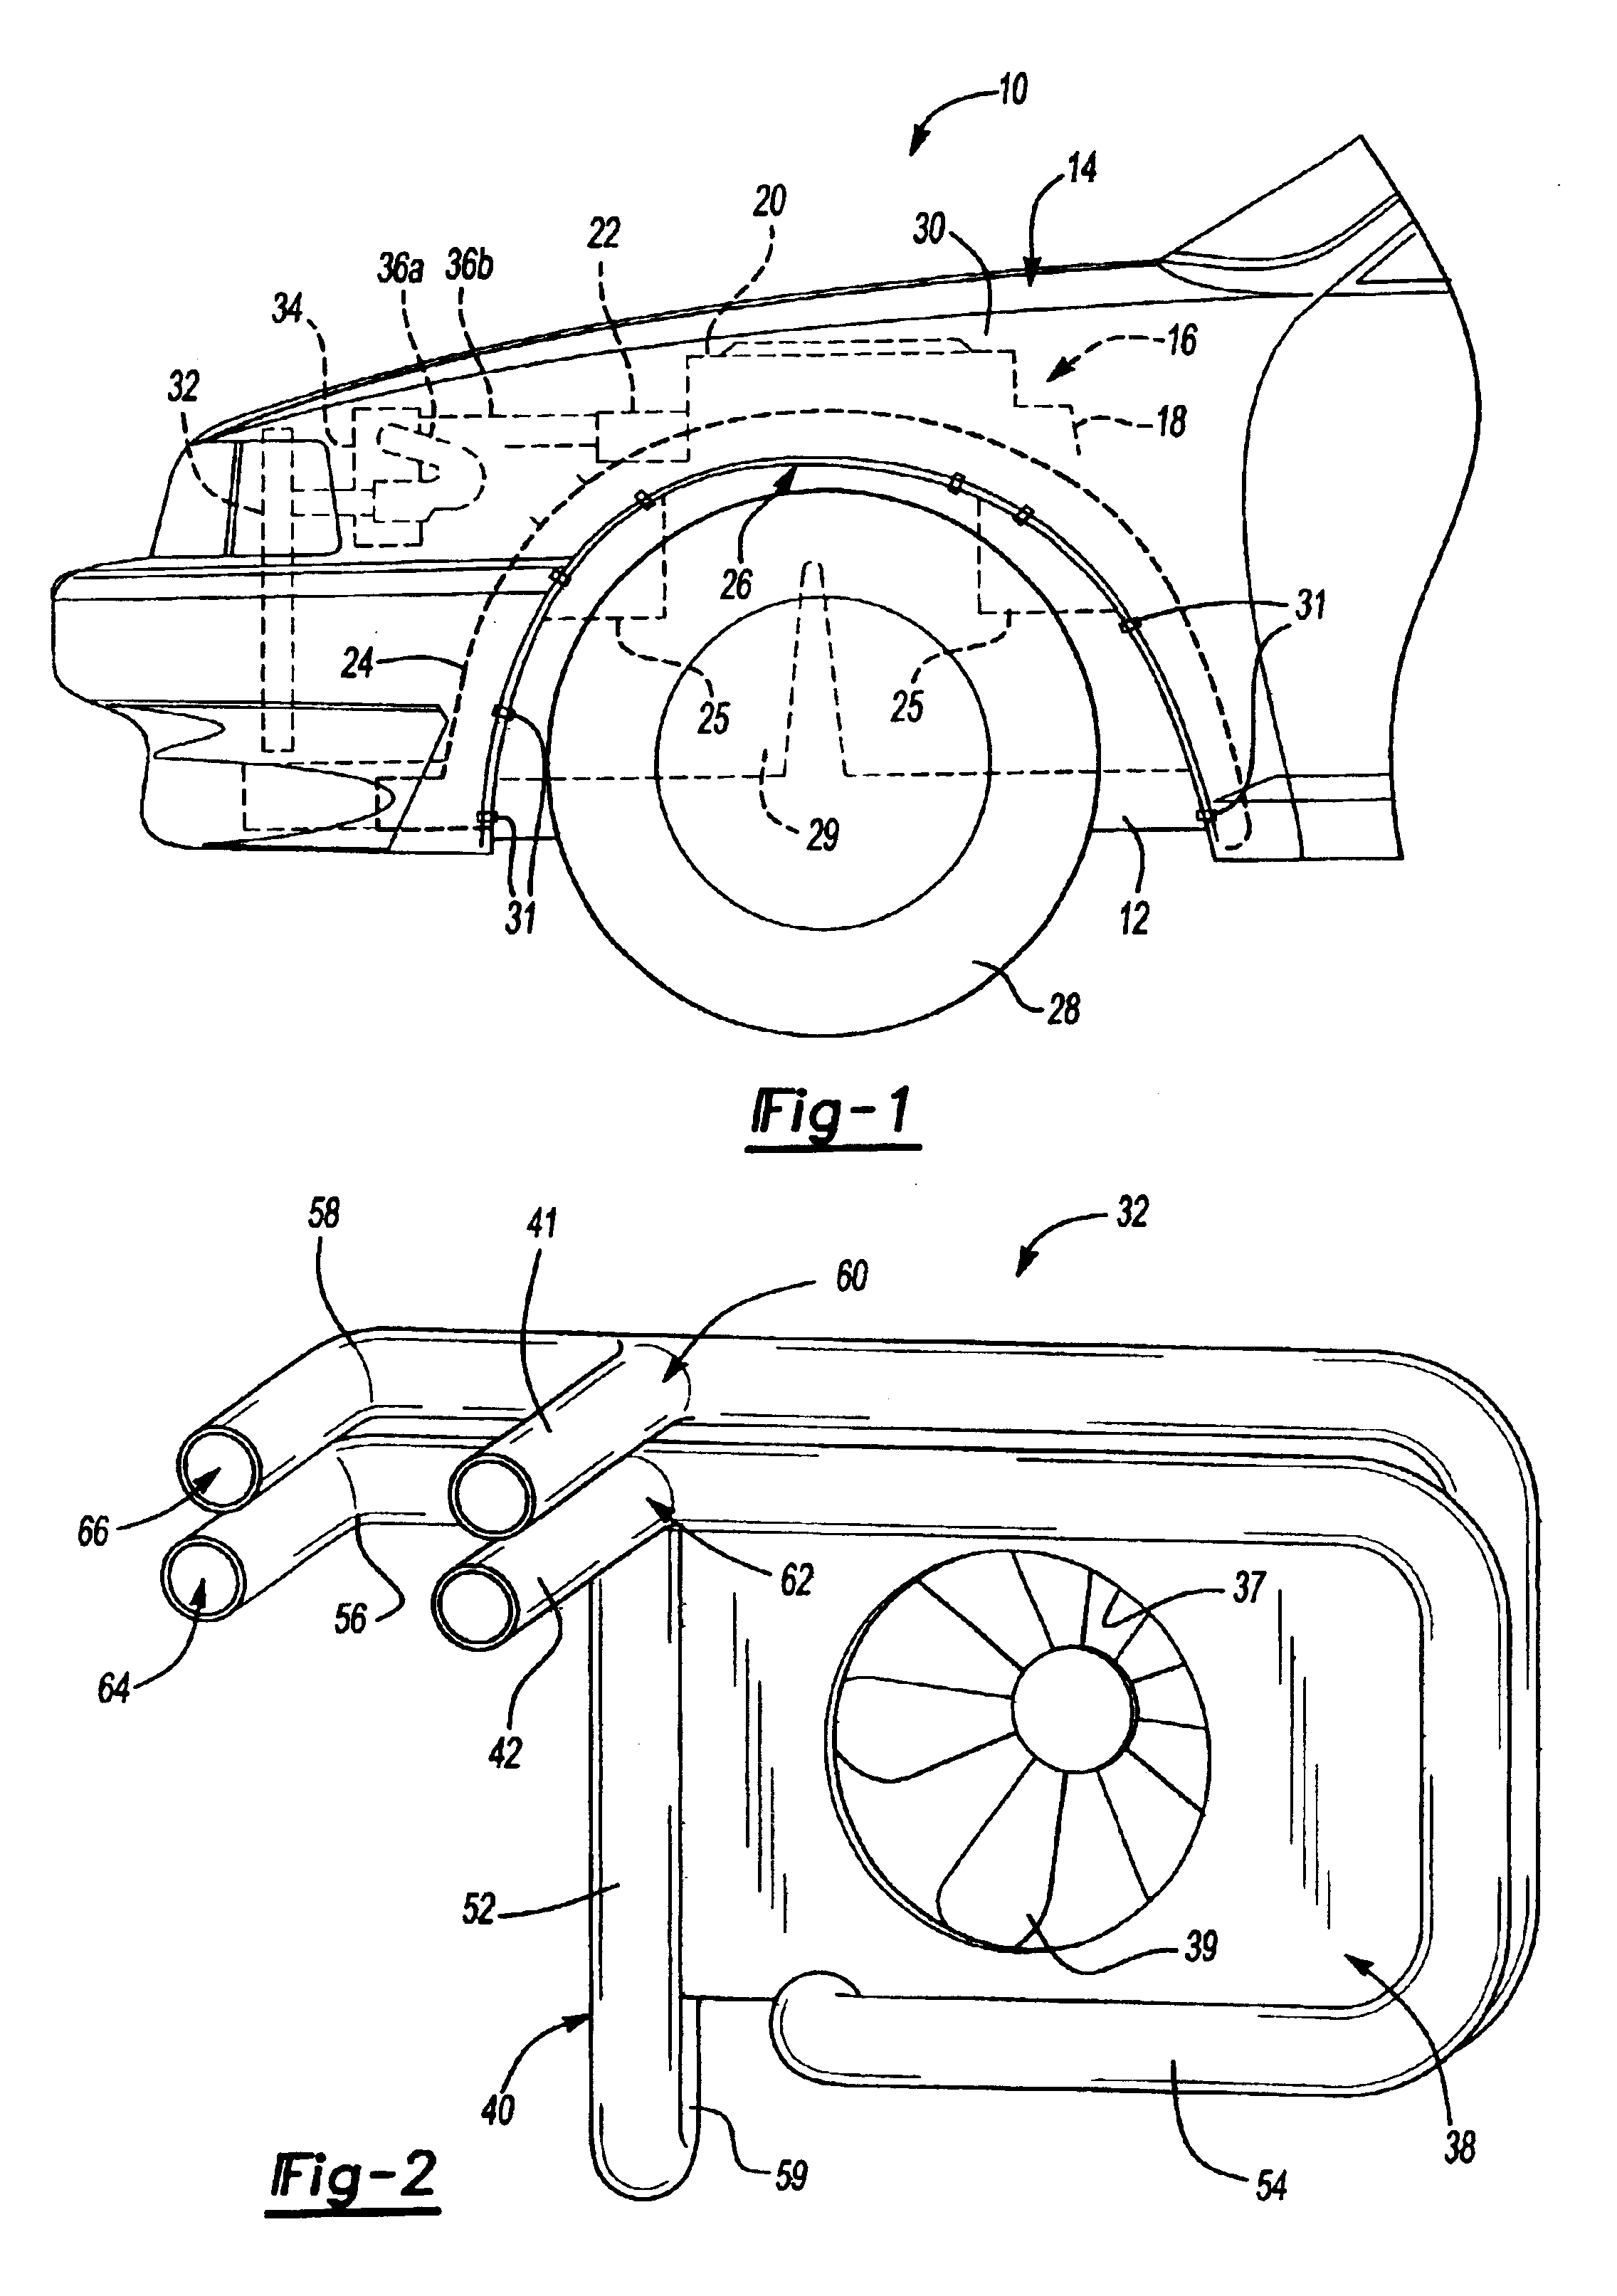 Integrated engine compartment component and air intake system